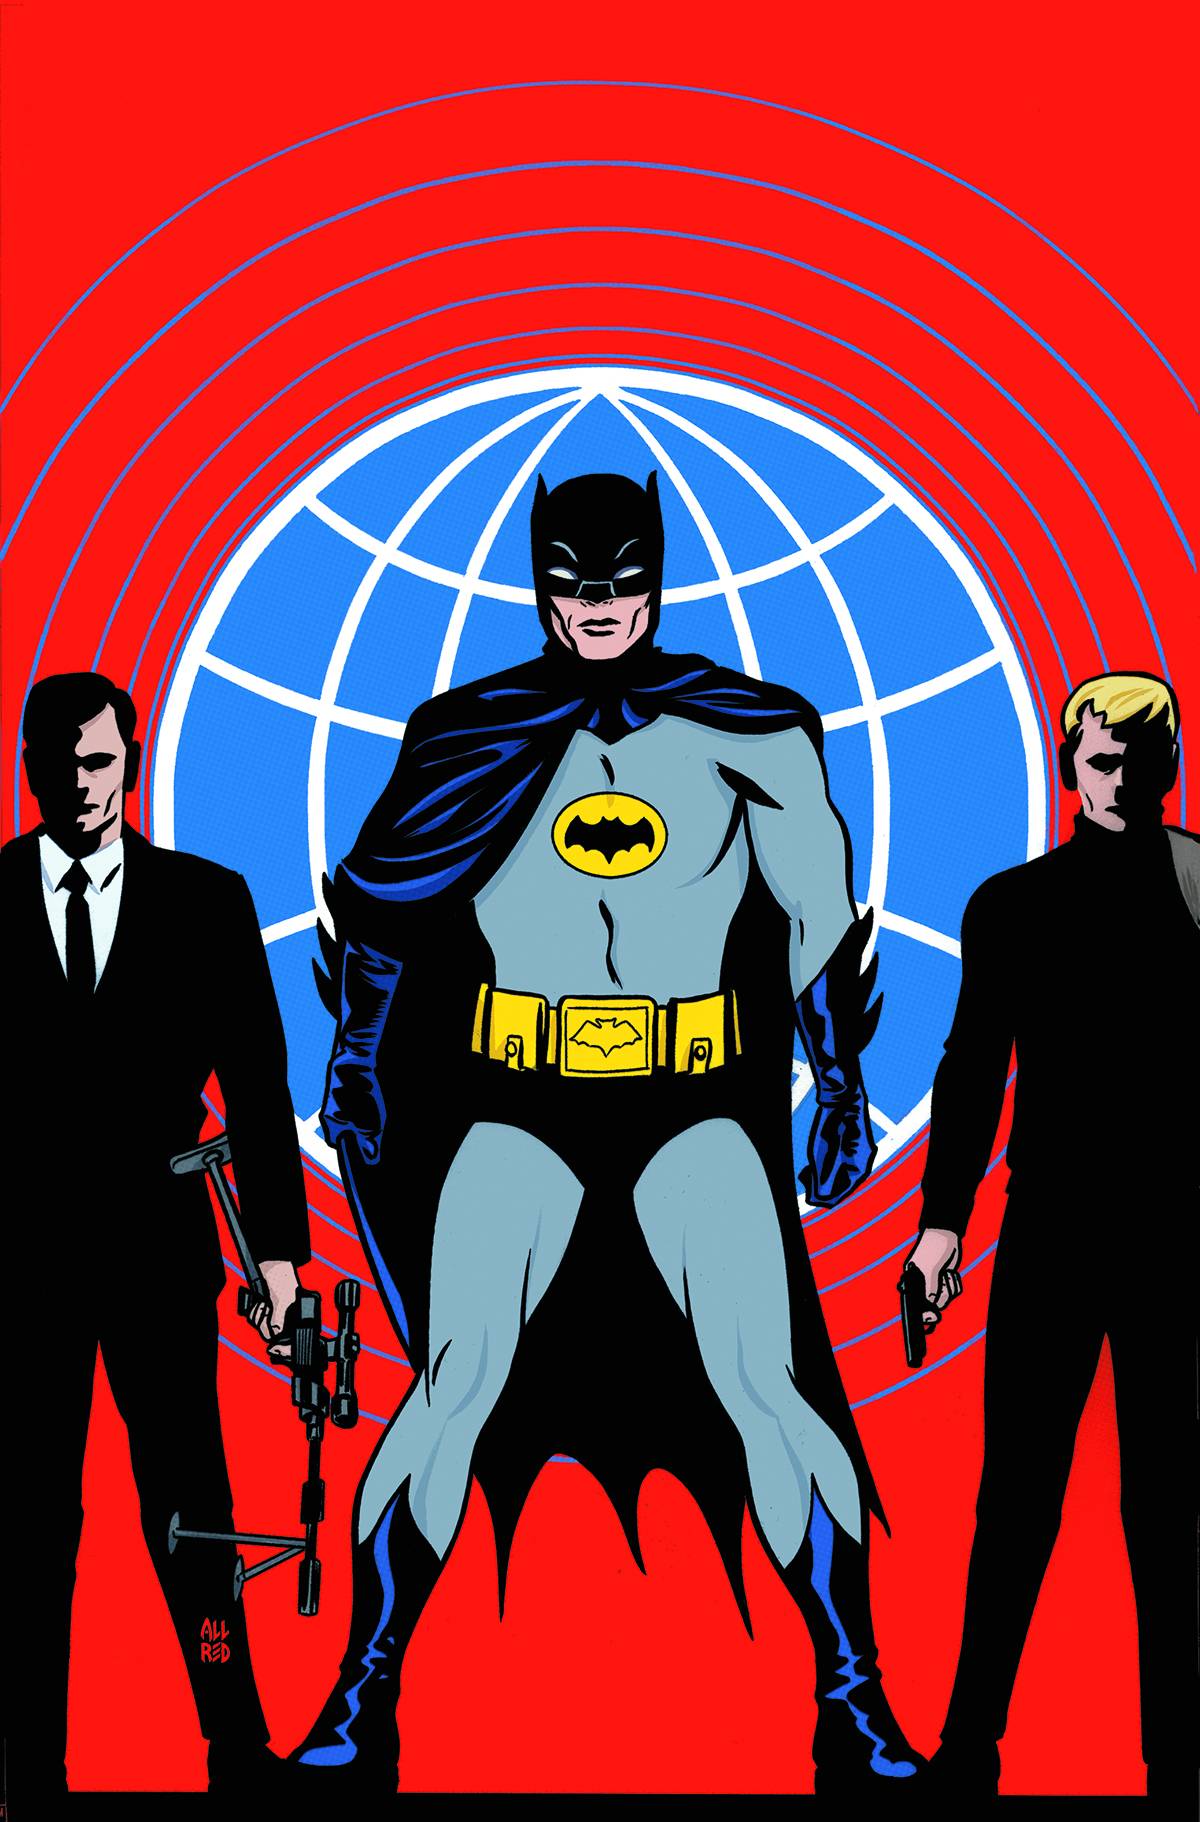 Batman 66 Meets the Man From Uncle #2